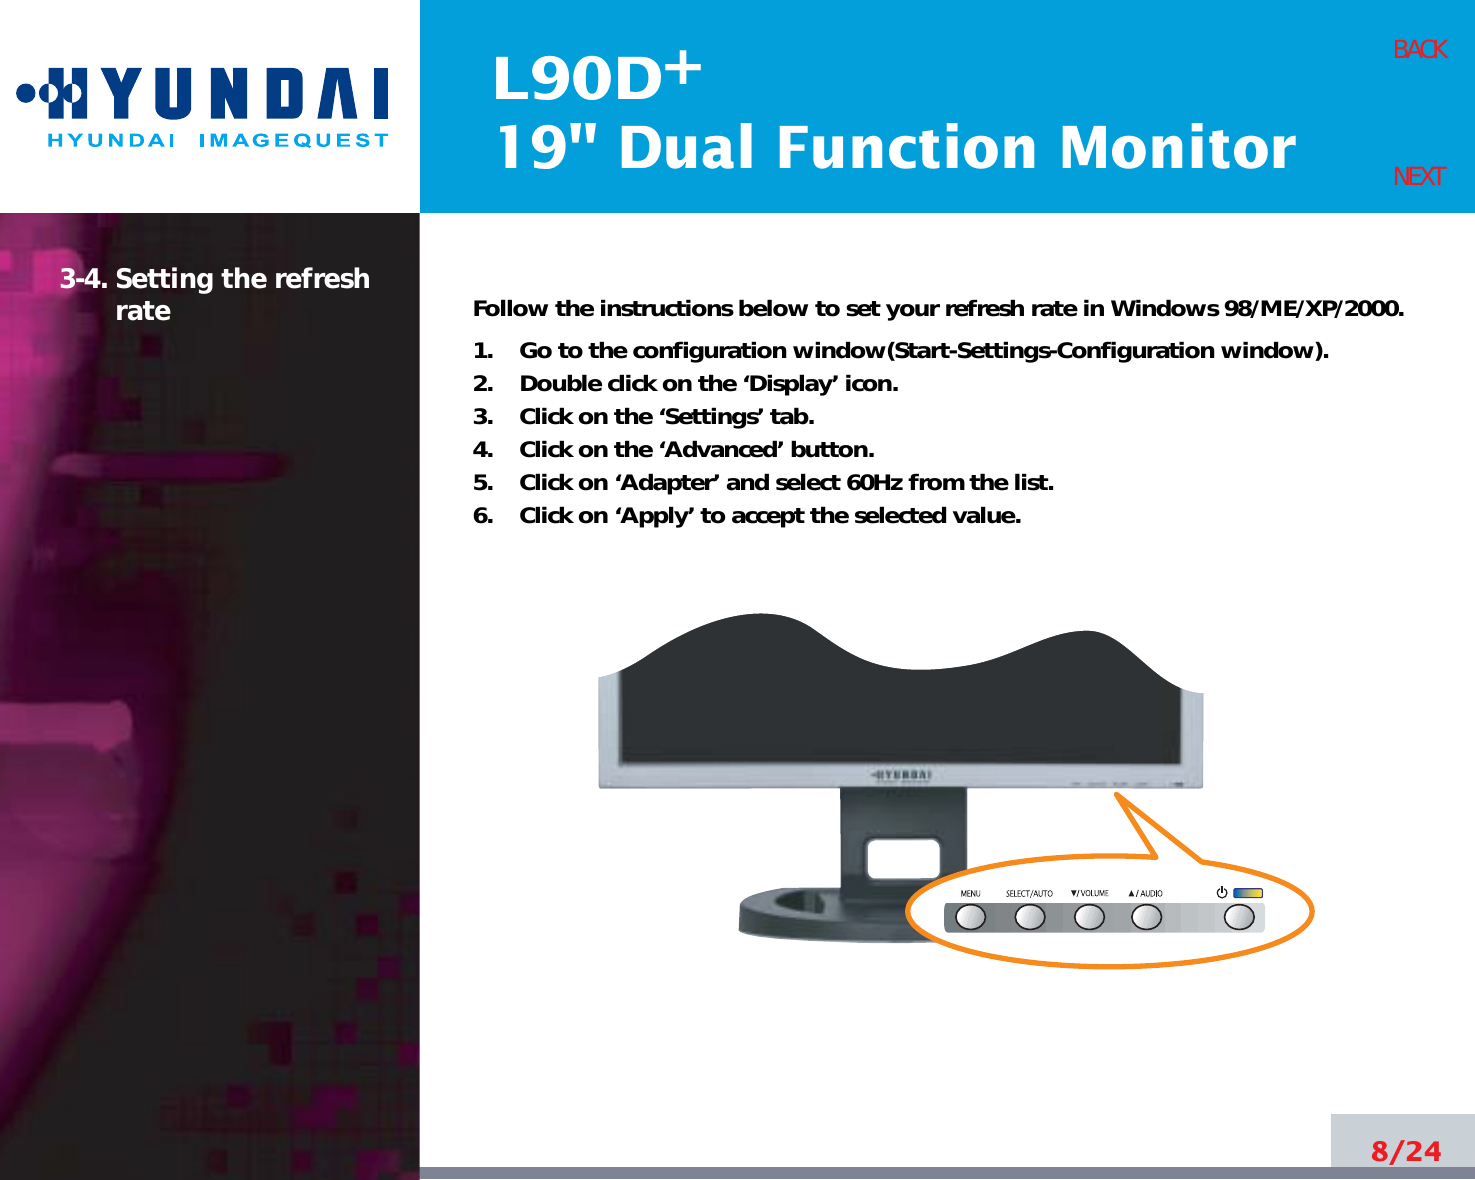 L90D19&quot; Dual Function Monitor+3-4. Setting the refreshrate Follow the instructions below to set your refresh rate in Windows 98/ME/XP/2000.1.    Go to the configuration window(Start-Settings-Configuration window).2.    Double click on the ‘Display’ icon.3.    Click on the ‘Settings’ tab.4.    Click on the ‘Advanced’ button.5.    Click on ‘Adapter’ and select 60Hz from the list.6.    Click on ‘Apply’ to accept the selected value.8/24BACKNEXT